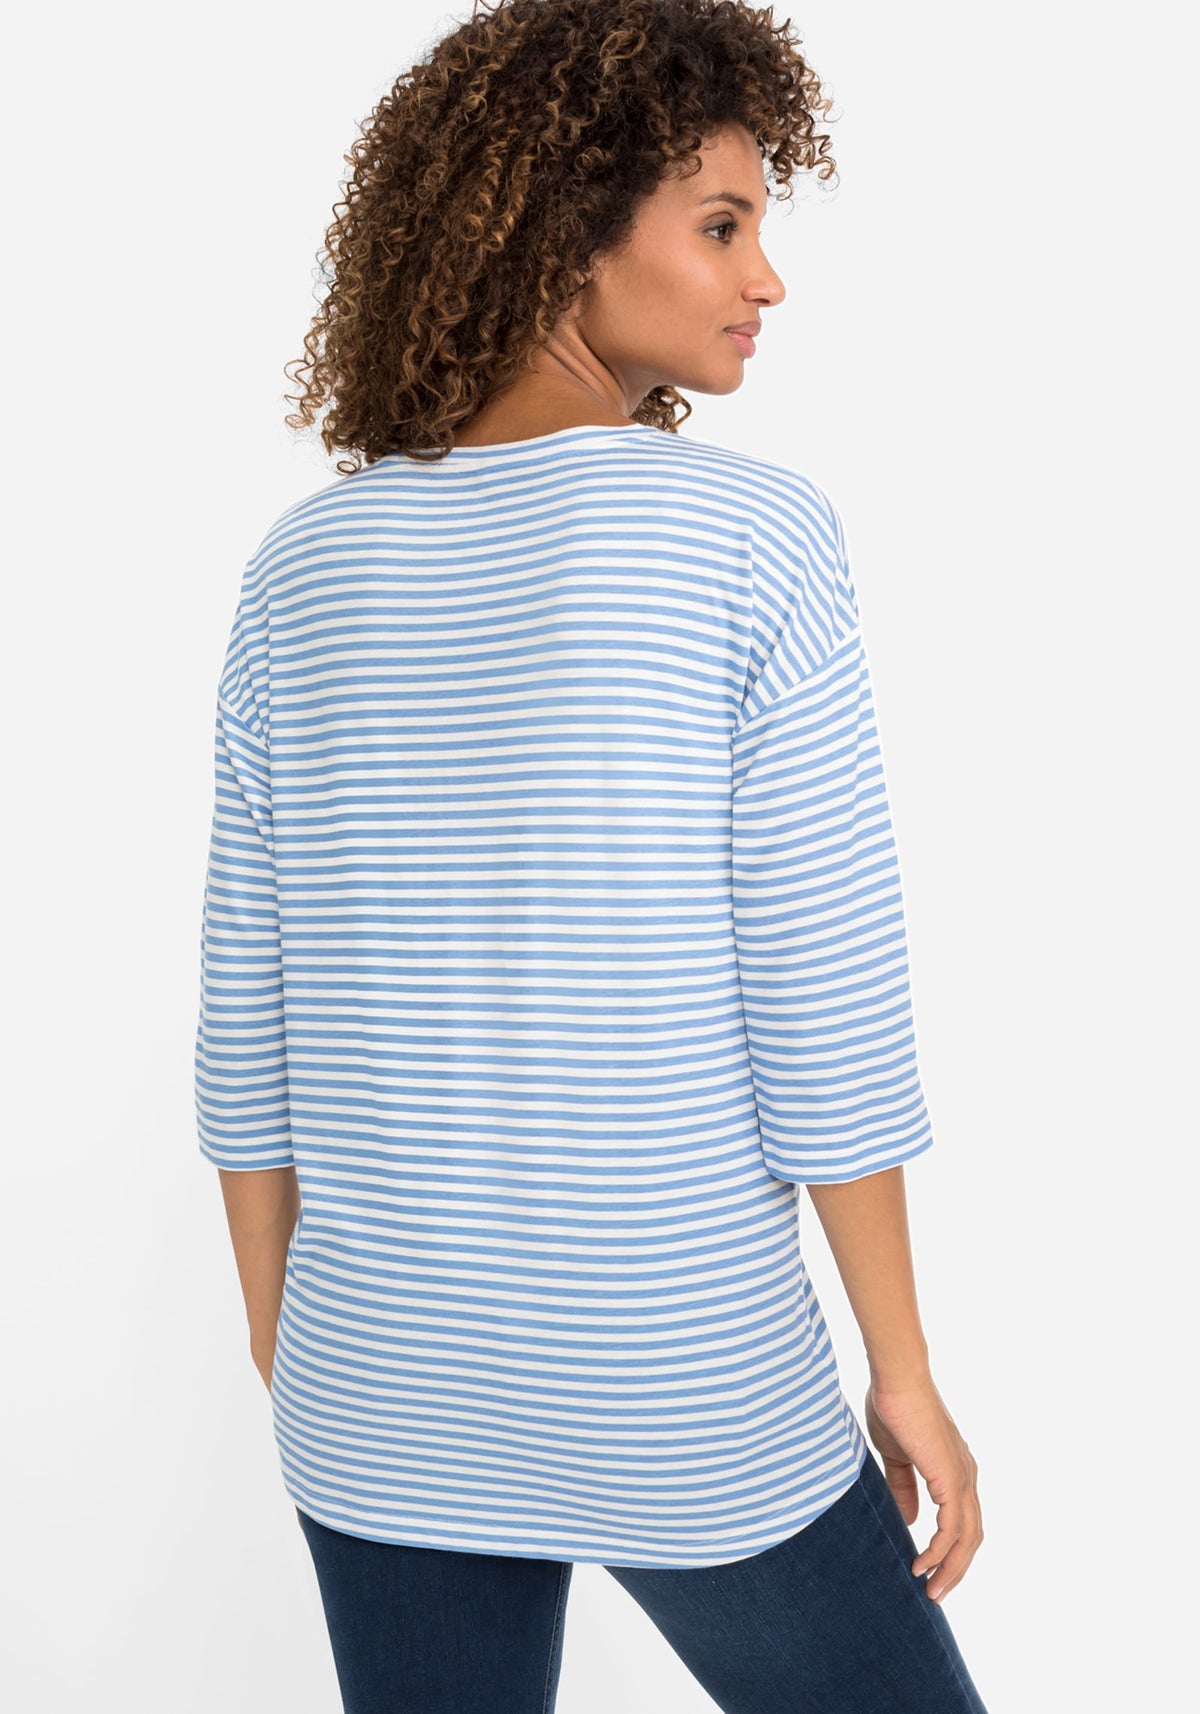 3/4 Sleeve Stripe and Placement Print T-Shirt containing TENCEL™ Modal